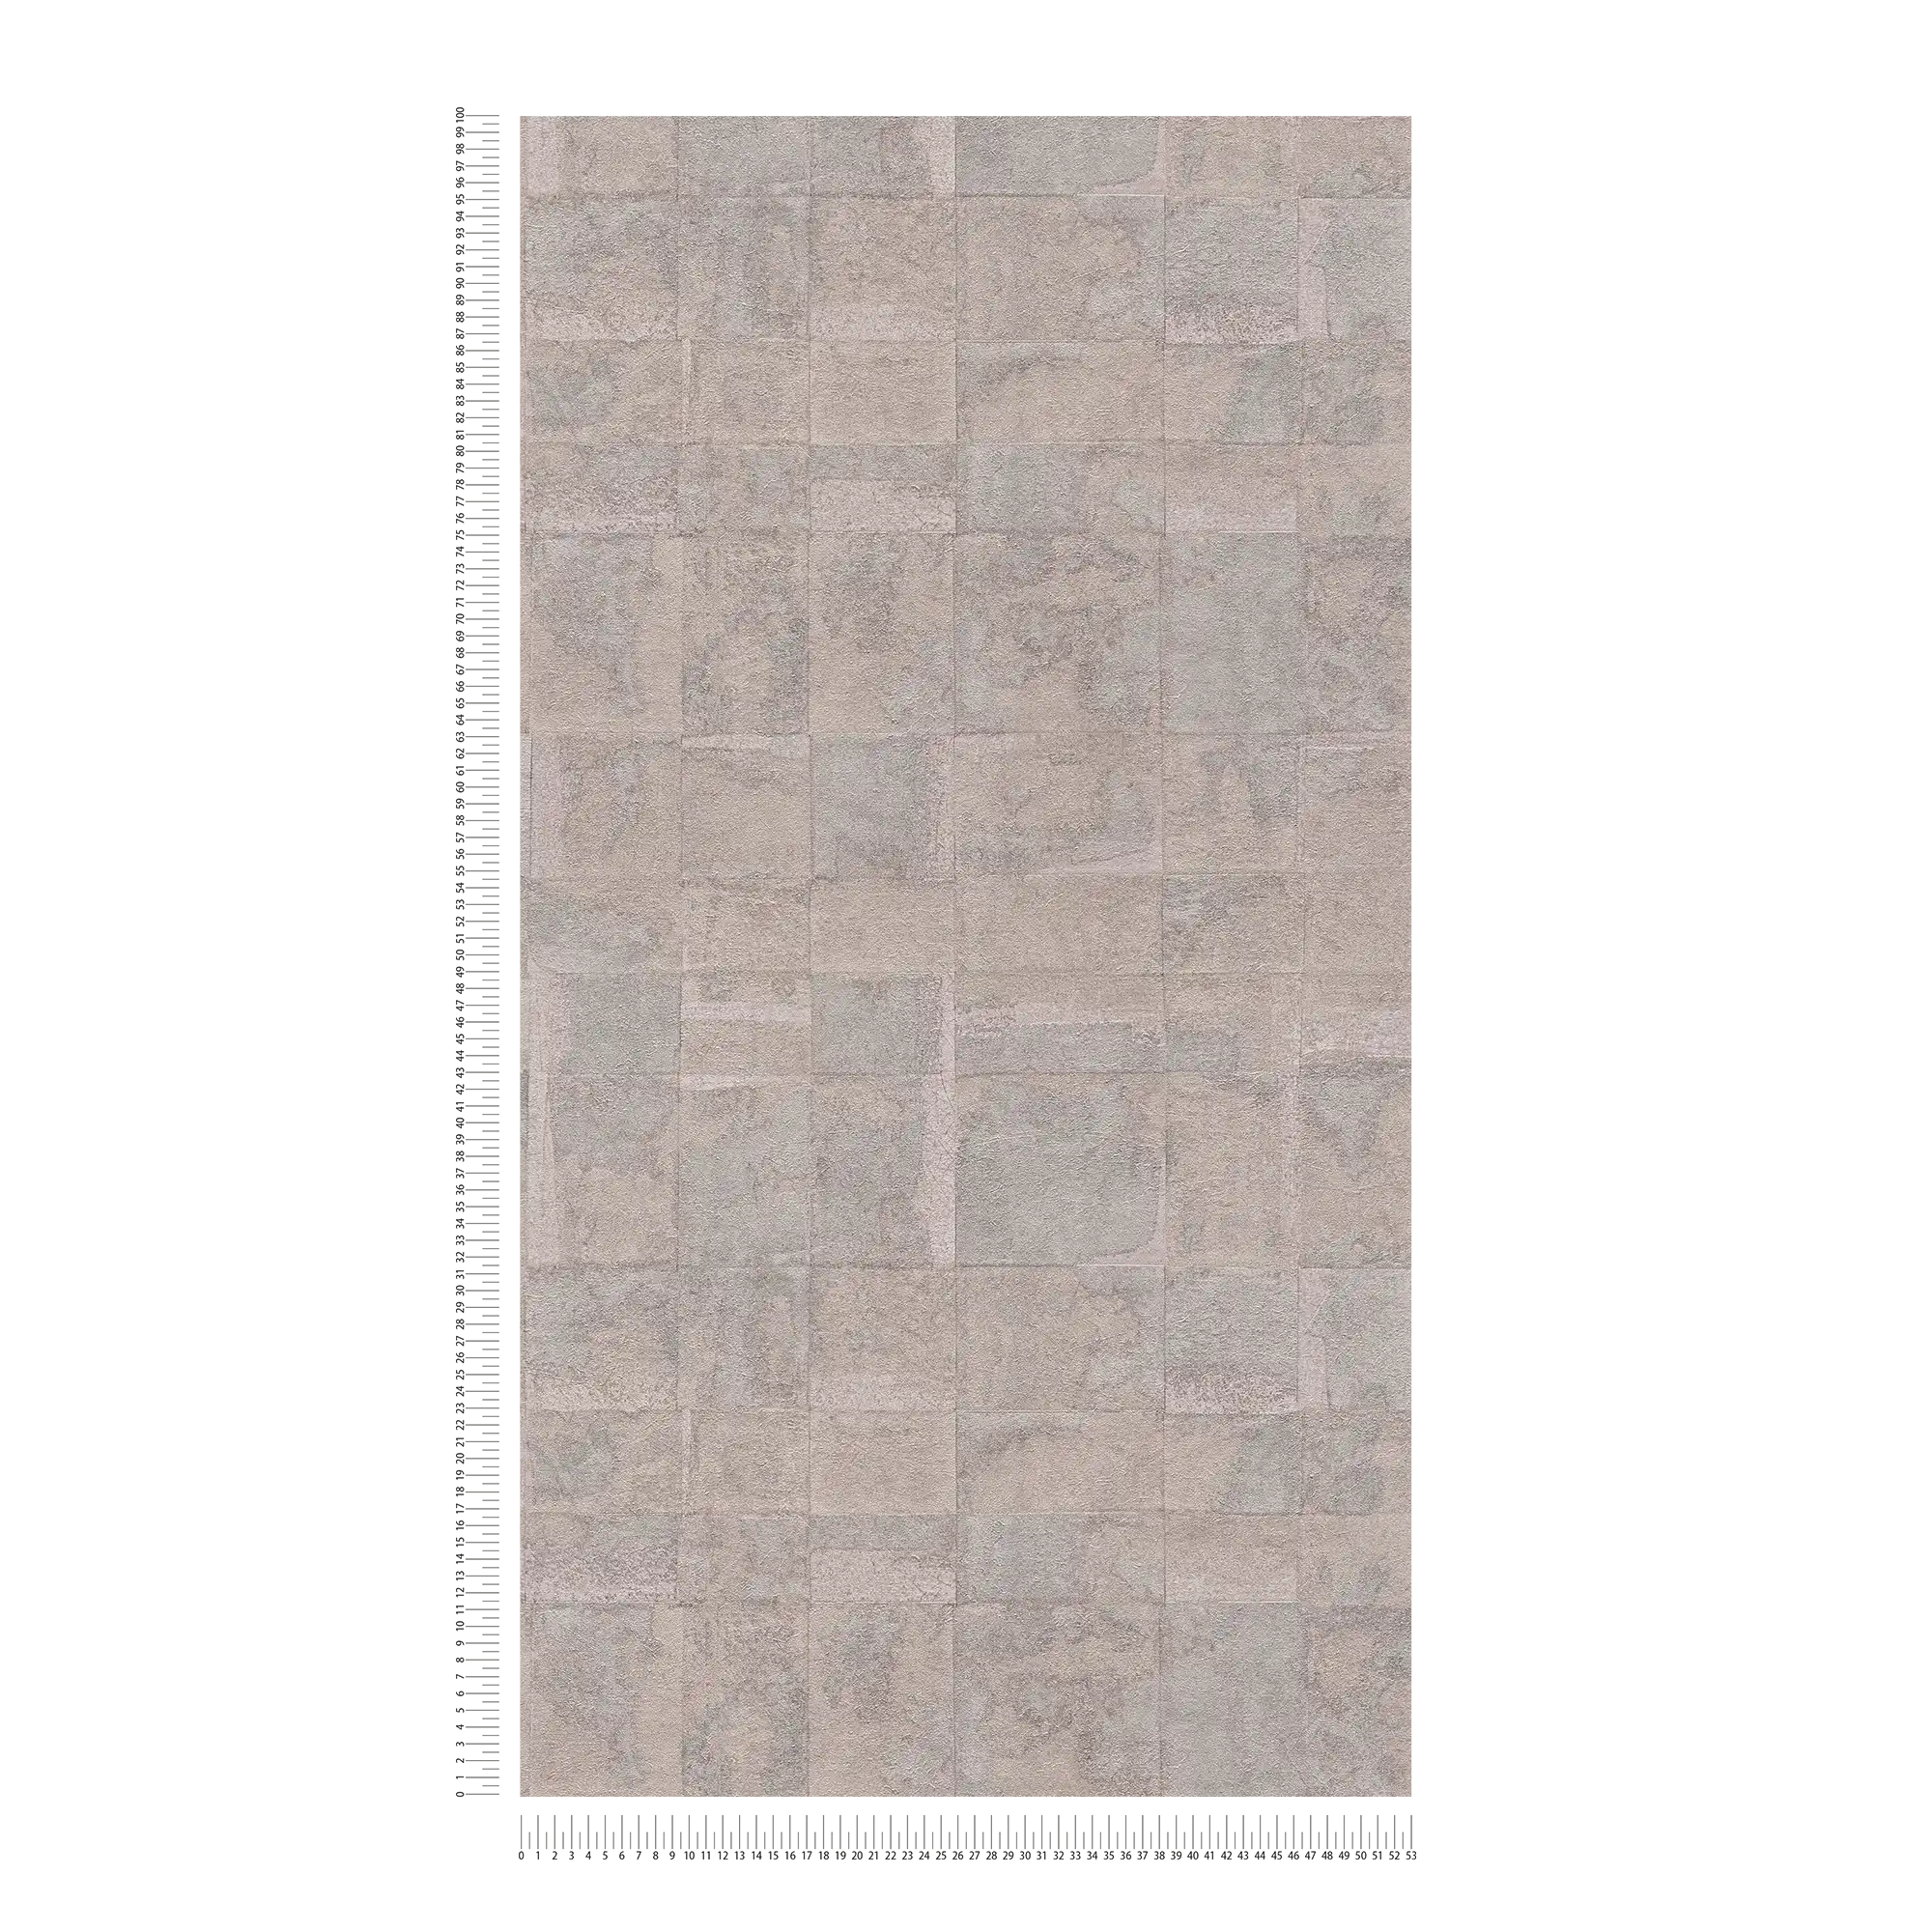             Non-woven wallpaper with tile pattern and patina effect - beige, grey
        